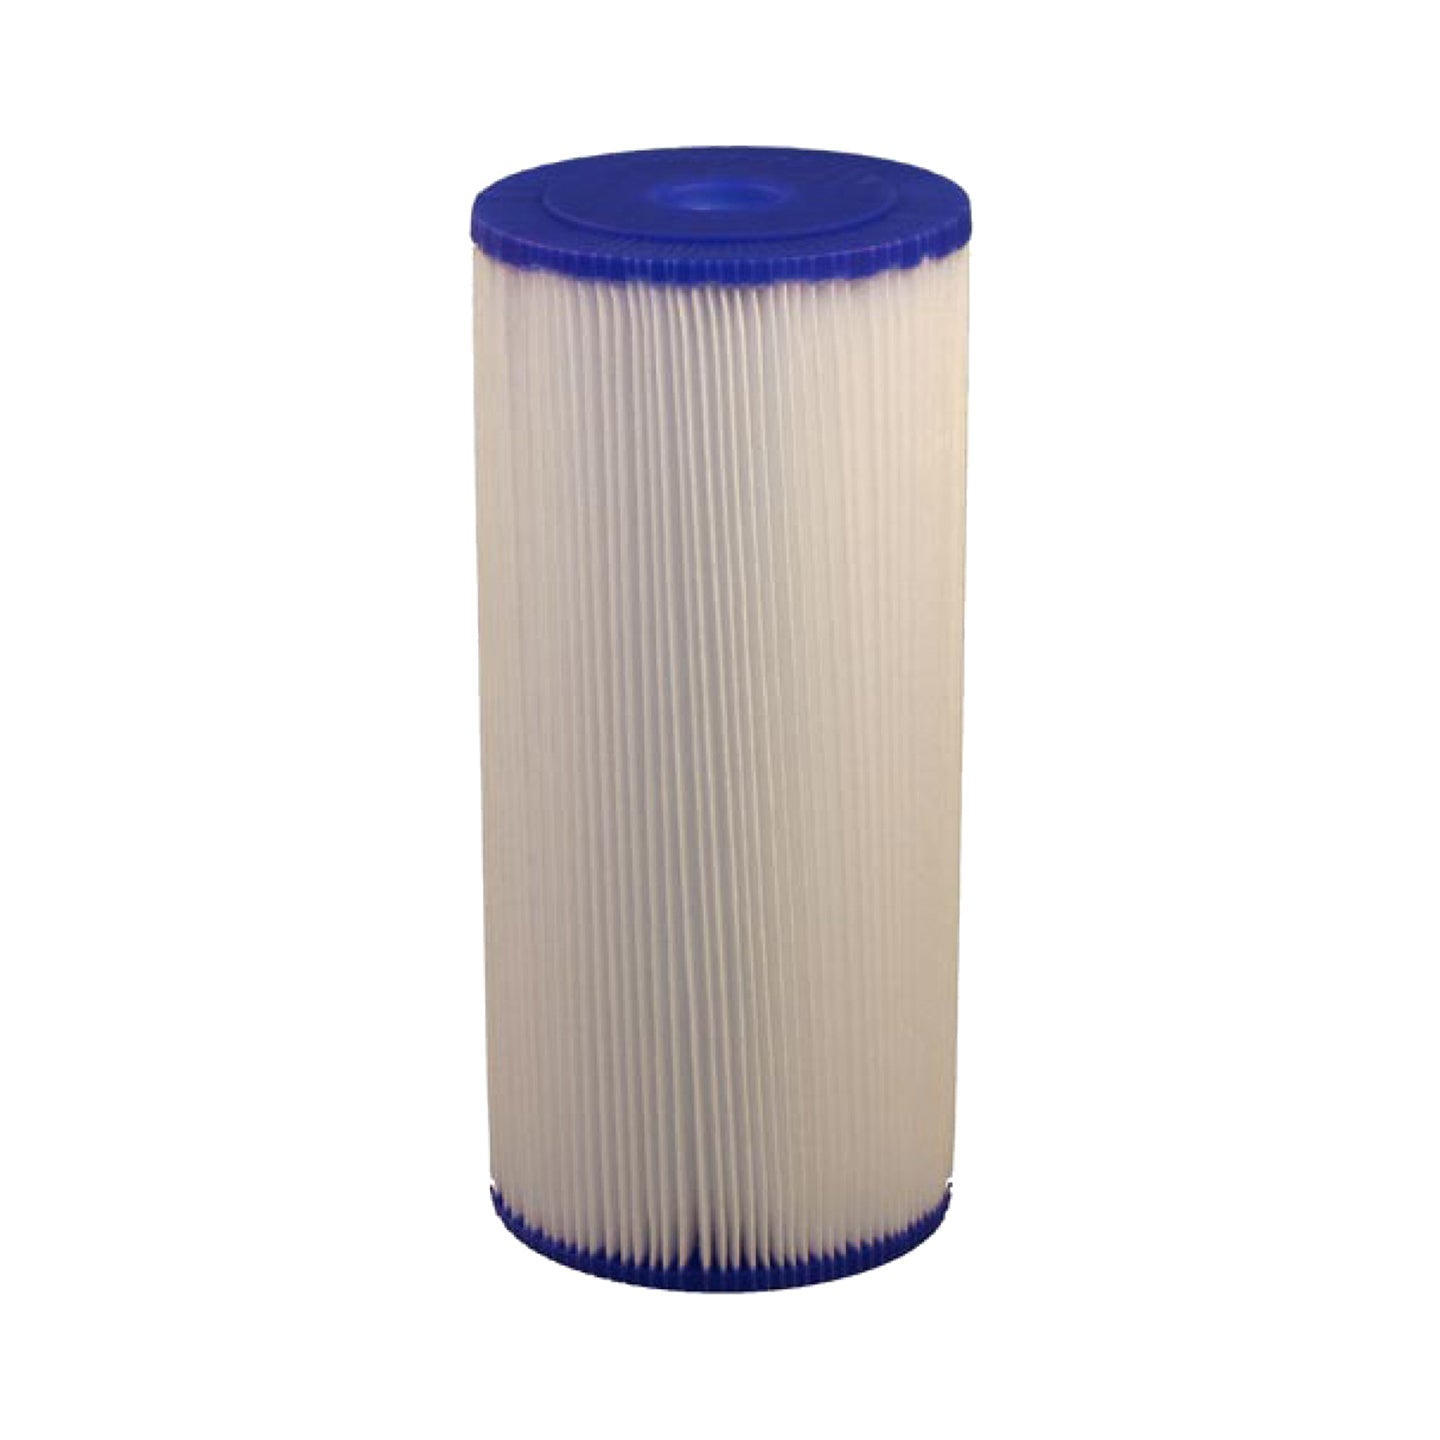 SPC-45-1020 Comparable 10-inch x 4.5-inch Pleated Sediment Water Filter 20 Micron by Tier1